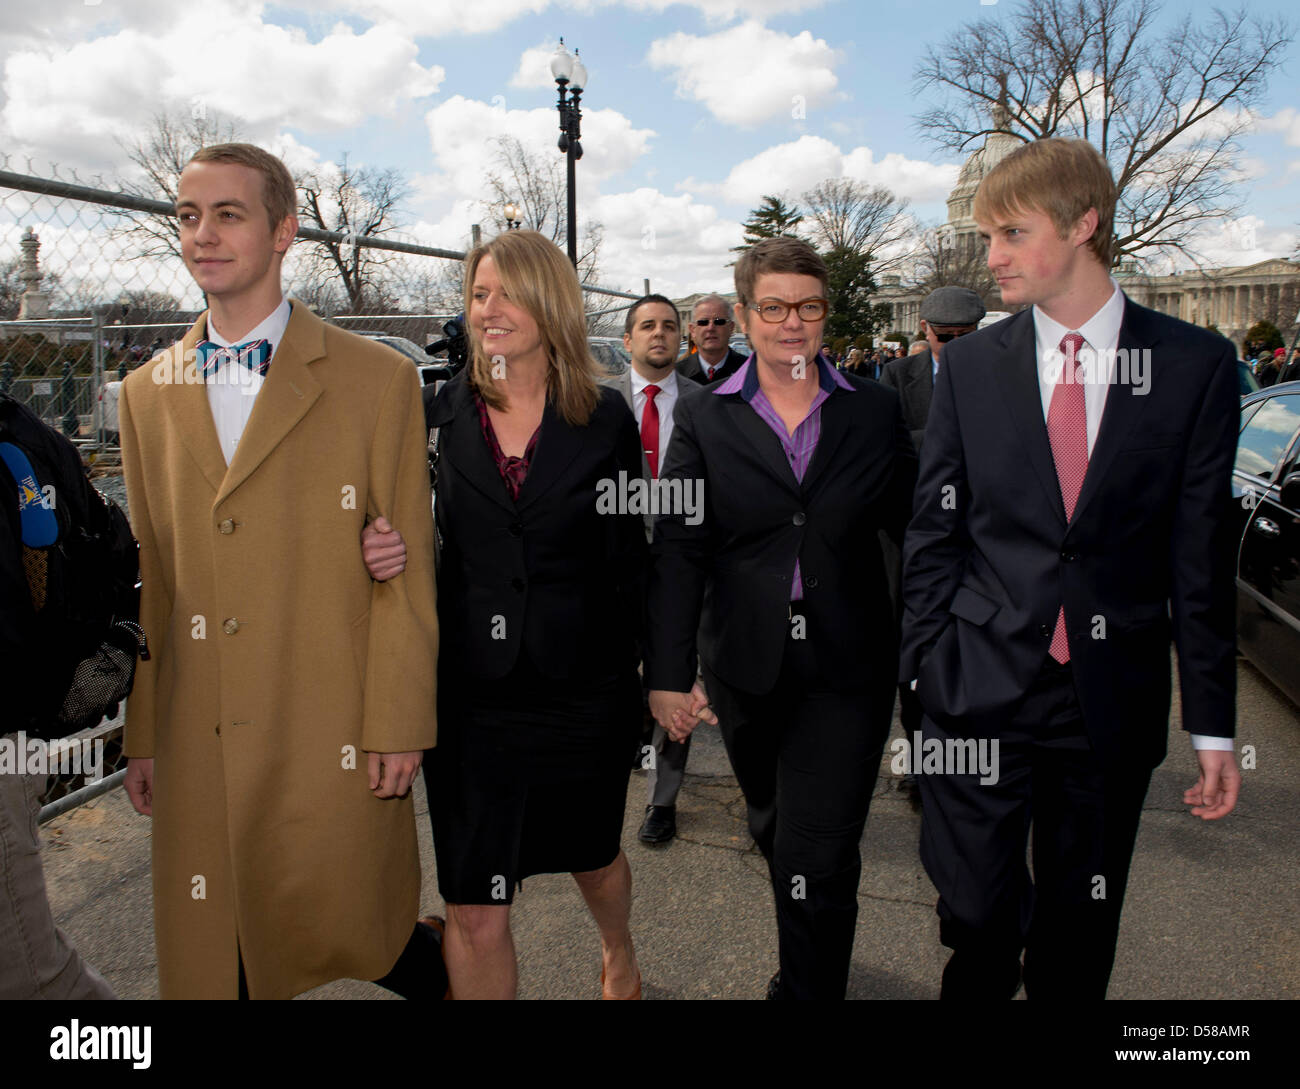 March 26, 2013 - Washington, District of Columbia, U.S. - Plaintiffs SANDY STIER (left) and KRIS PERRY leave the U.S. Supreme Court with their sons SPENCER PERRY (left) and ELLIOTT PERRY after oral arguments in the landmark Proposition 8 marriage equality case.(Credit Image: © Brian Cahn/ZUMAPRESS.com) Stock Photo